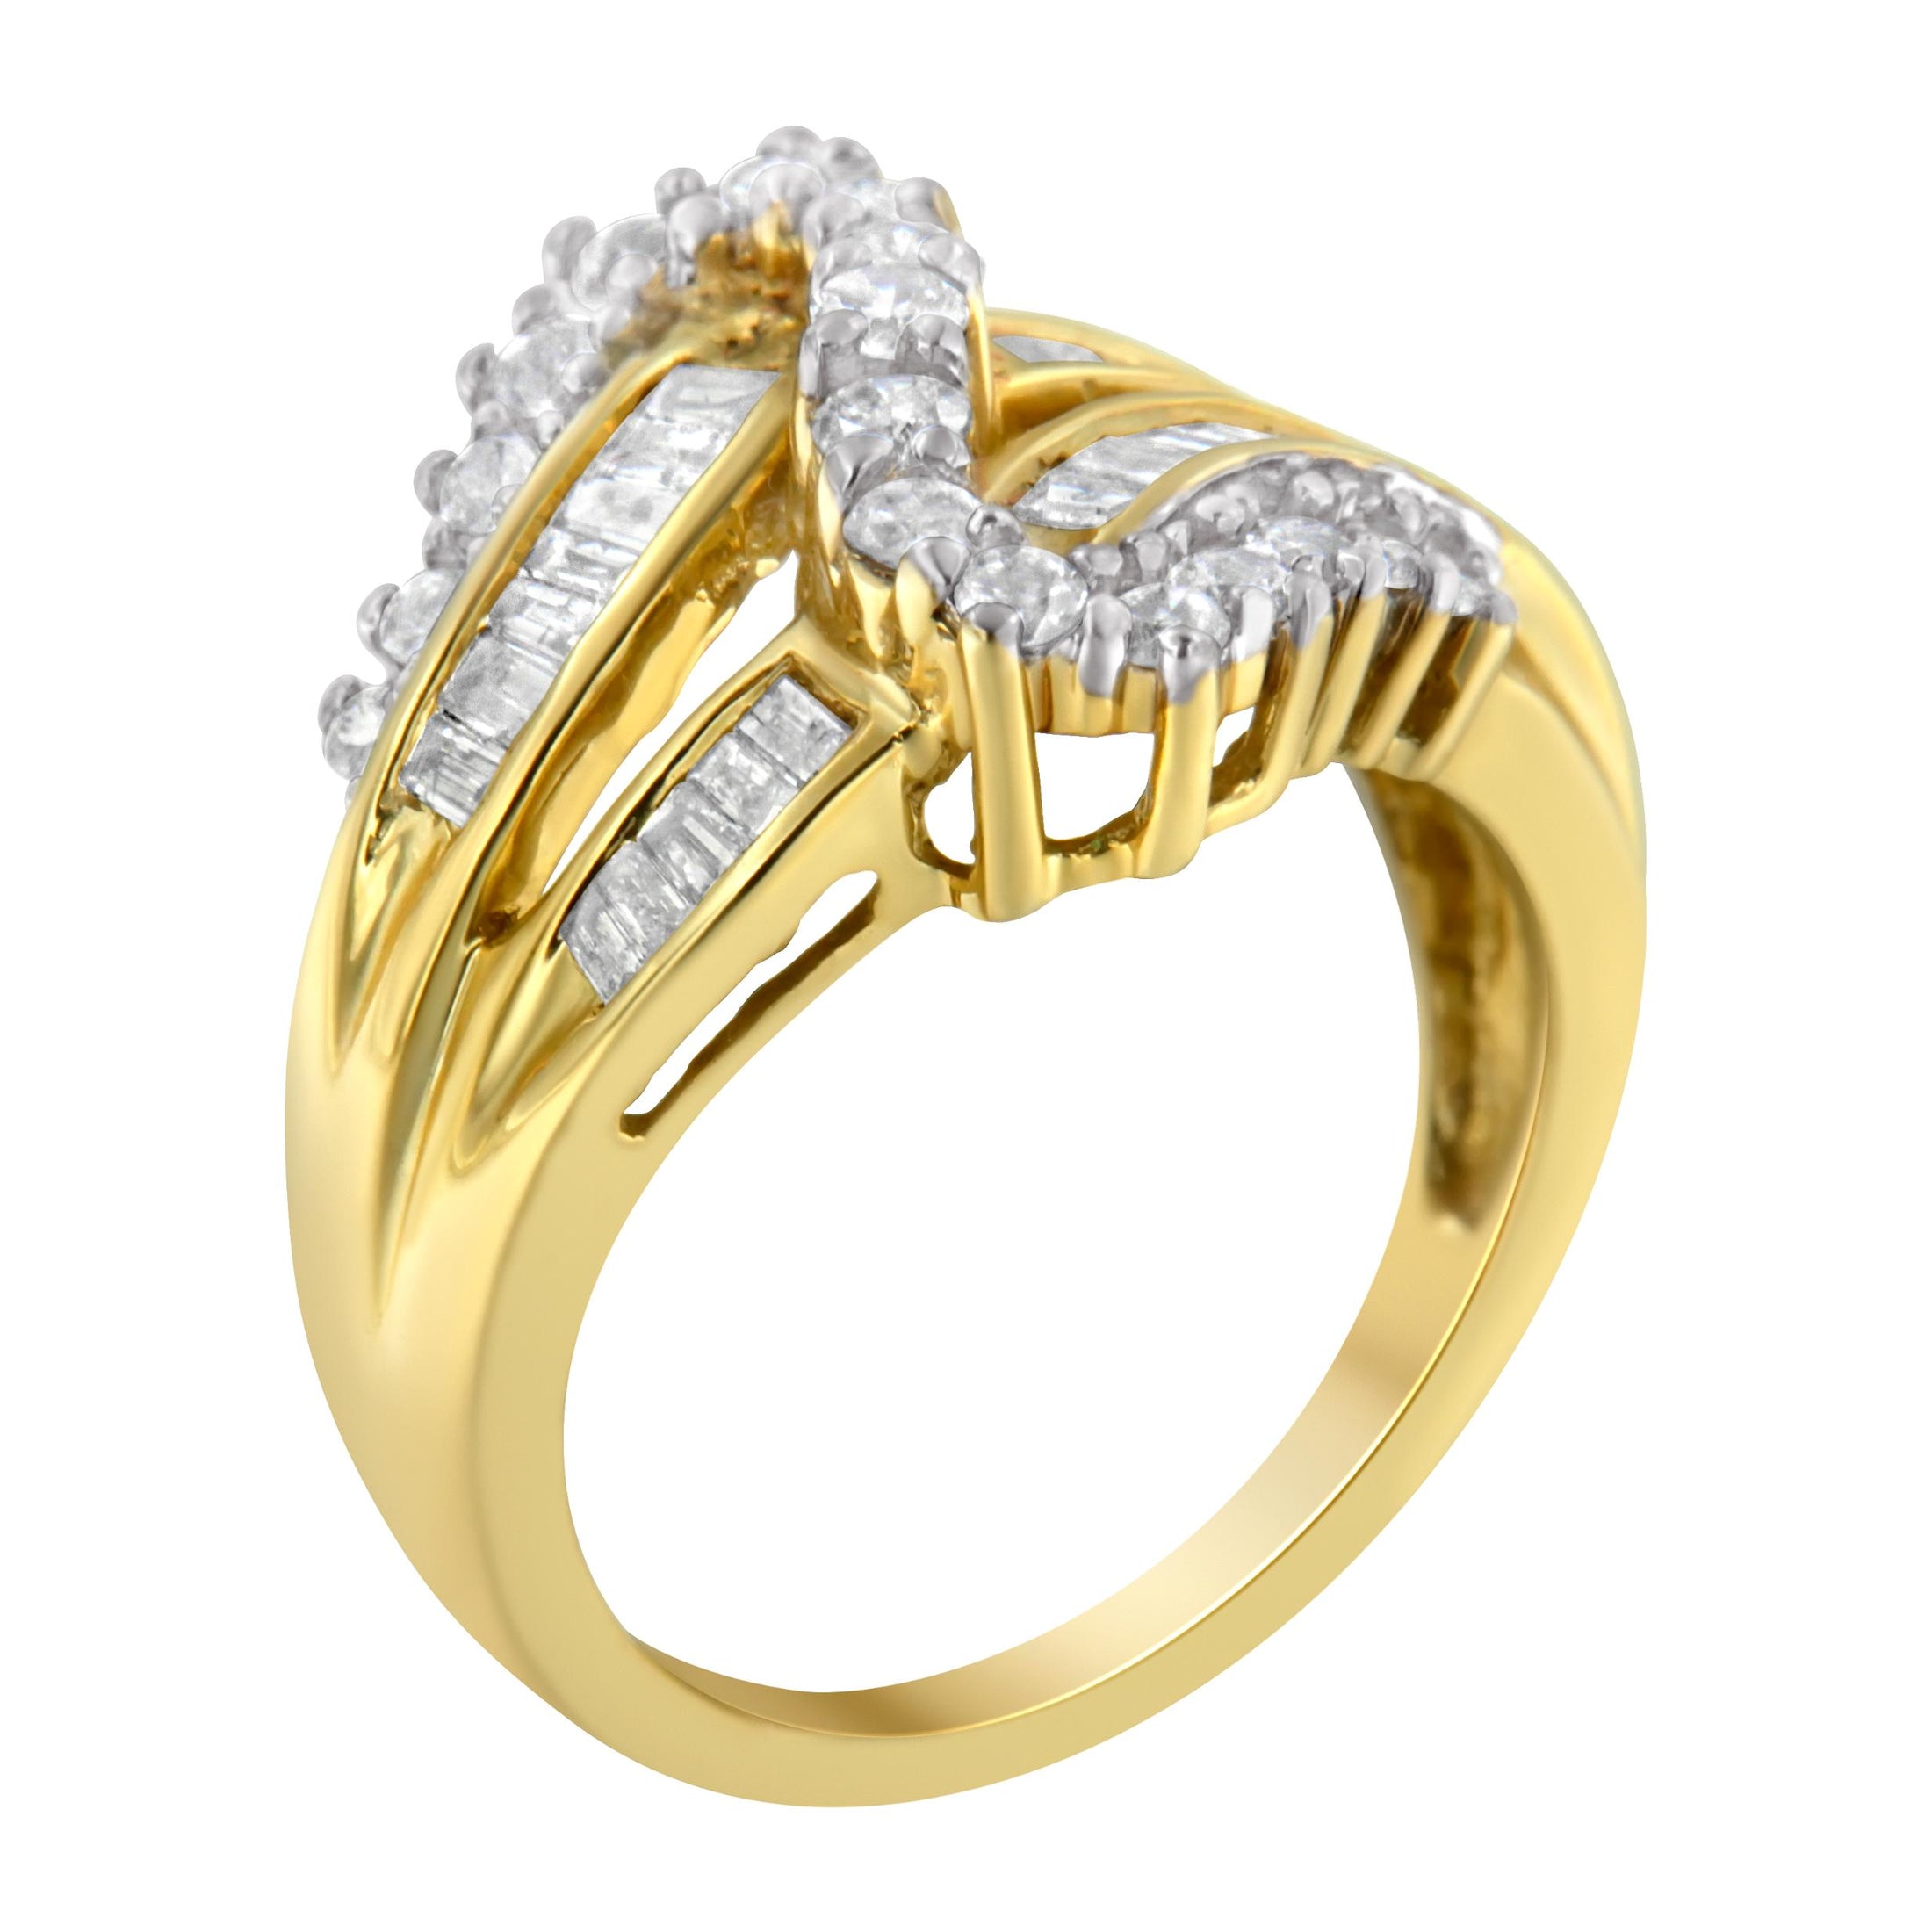 10K Yellow Gold Round and Baguette Cut Diamond Bypass Ring 1 Cttw,- Size 7